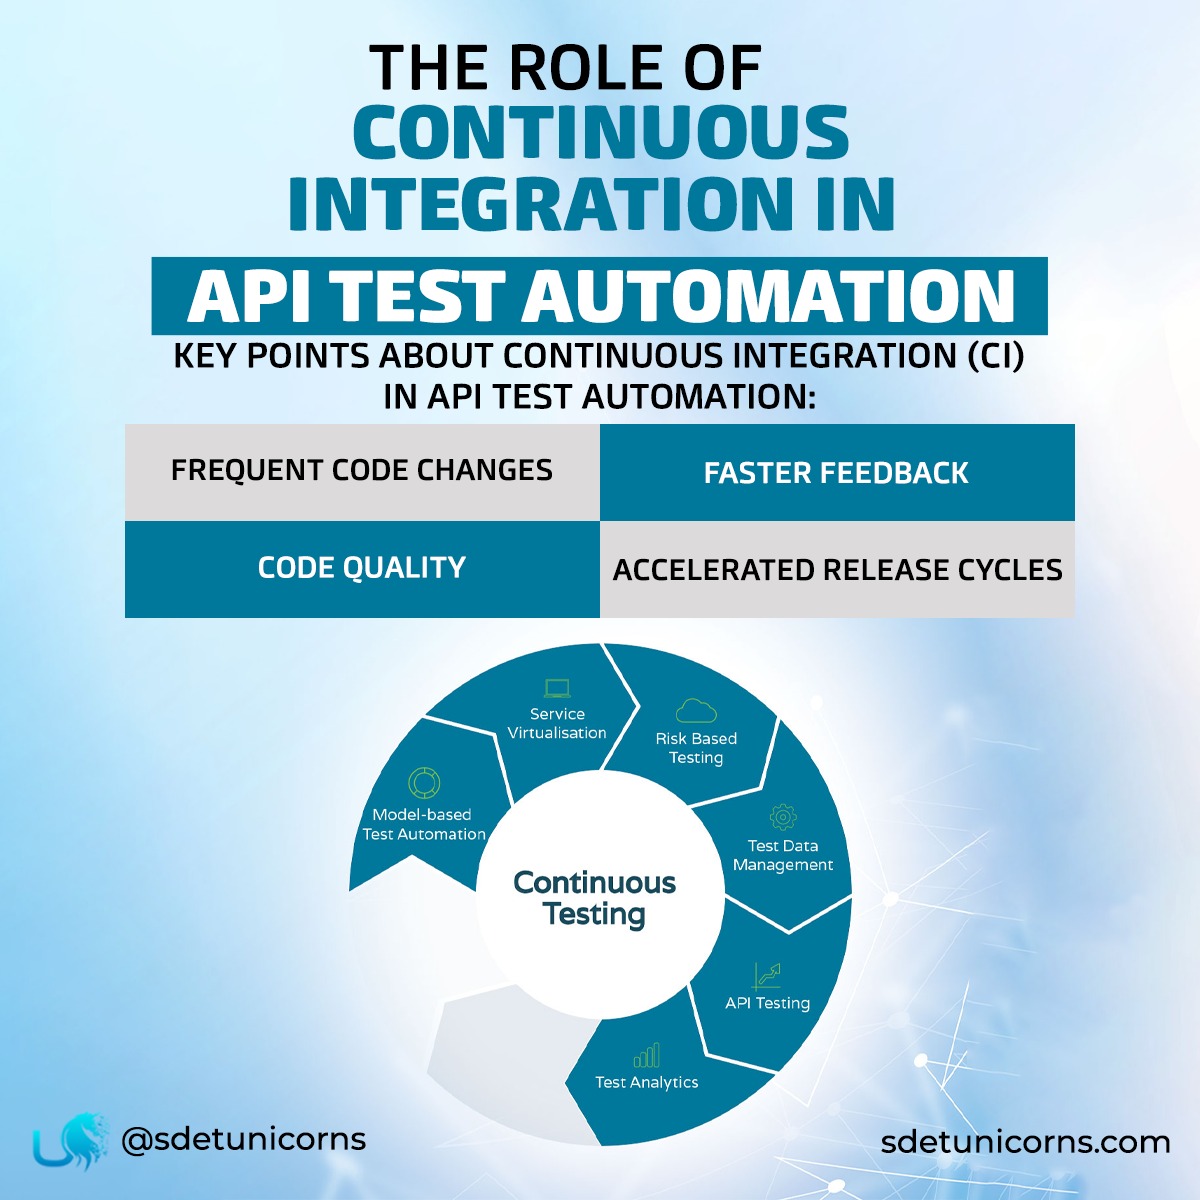 Maintain code quality and accelerate release cycles with continuous integration in API test automation. sdetunicorns.com

#APIAutomation #TestAutomation #APItesting #AutomatedTesting #DevOps #AgileTesting